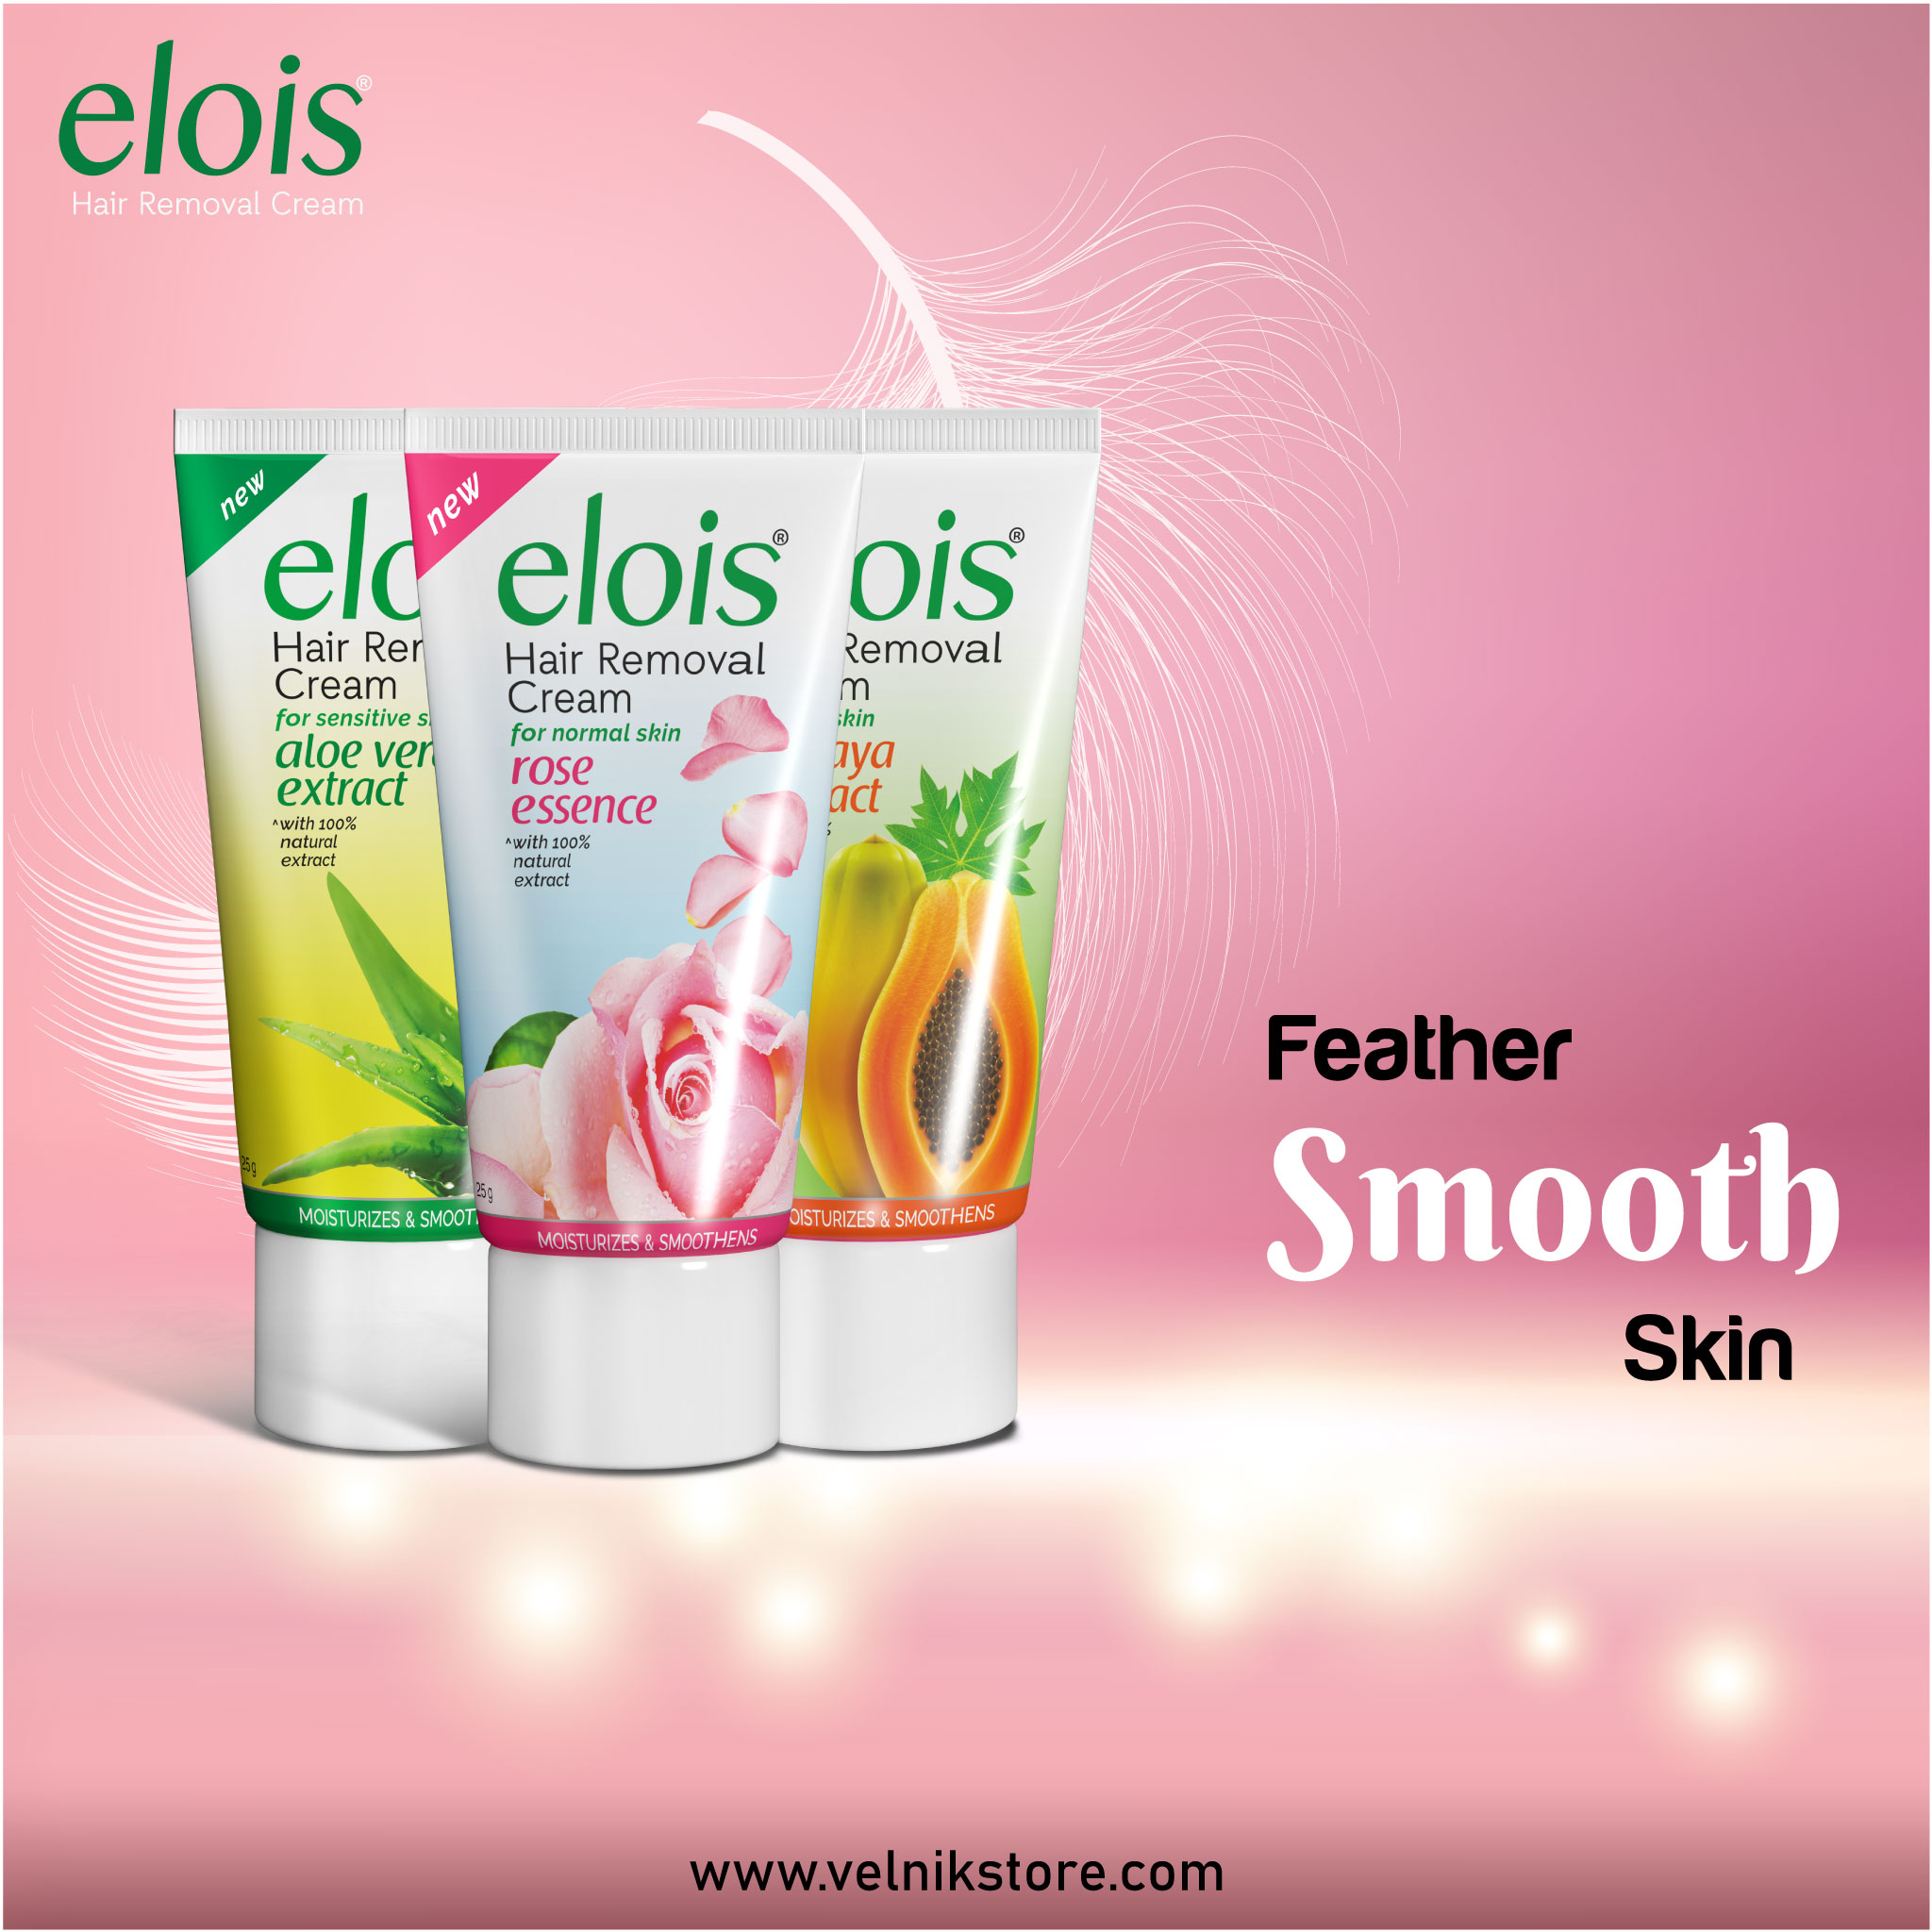 Elois Hair Removal CreamHealth and BeautyCosmeticsCentral DelhiChandni Chowk